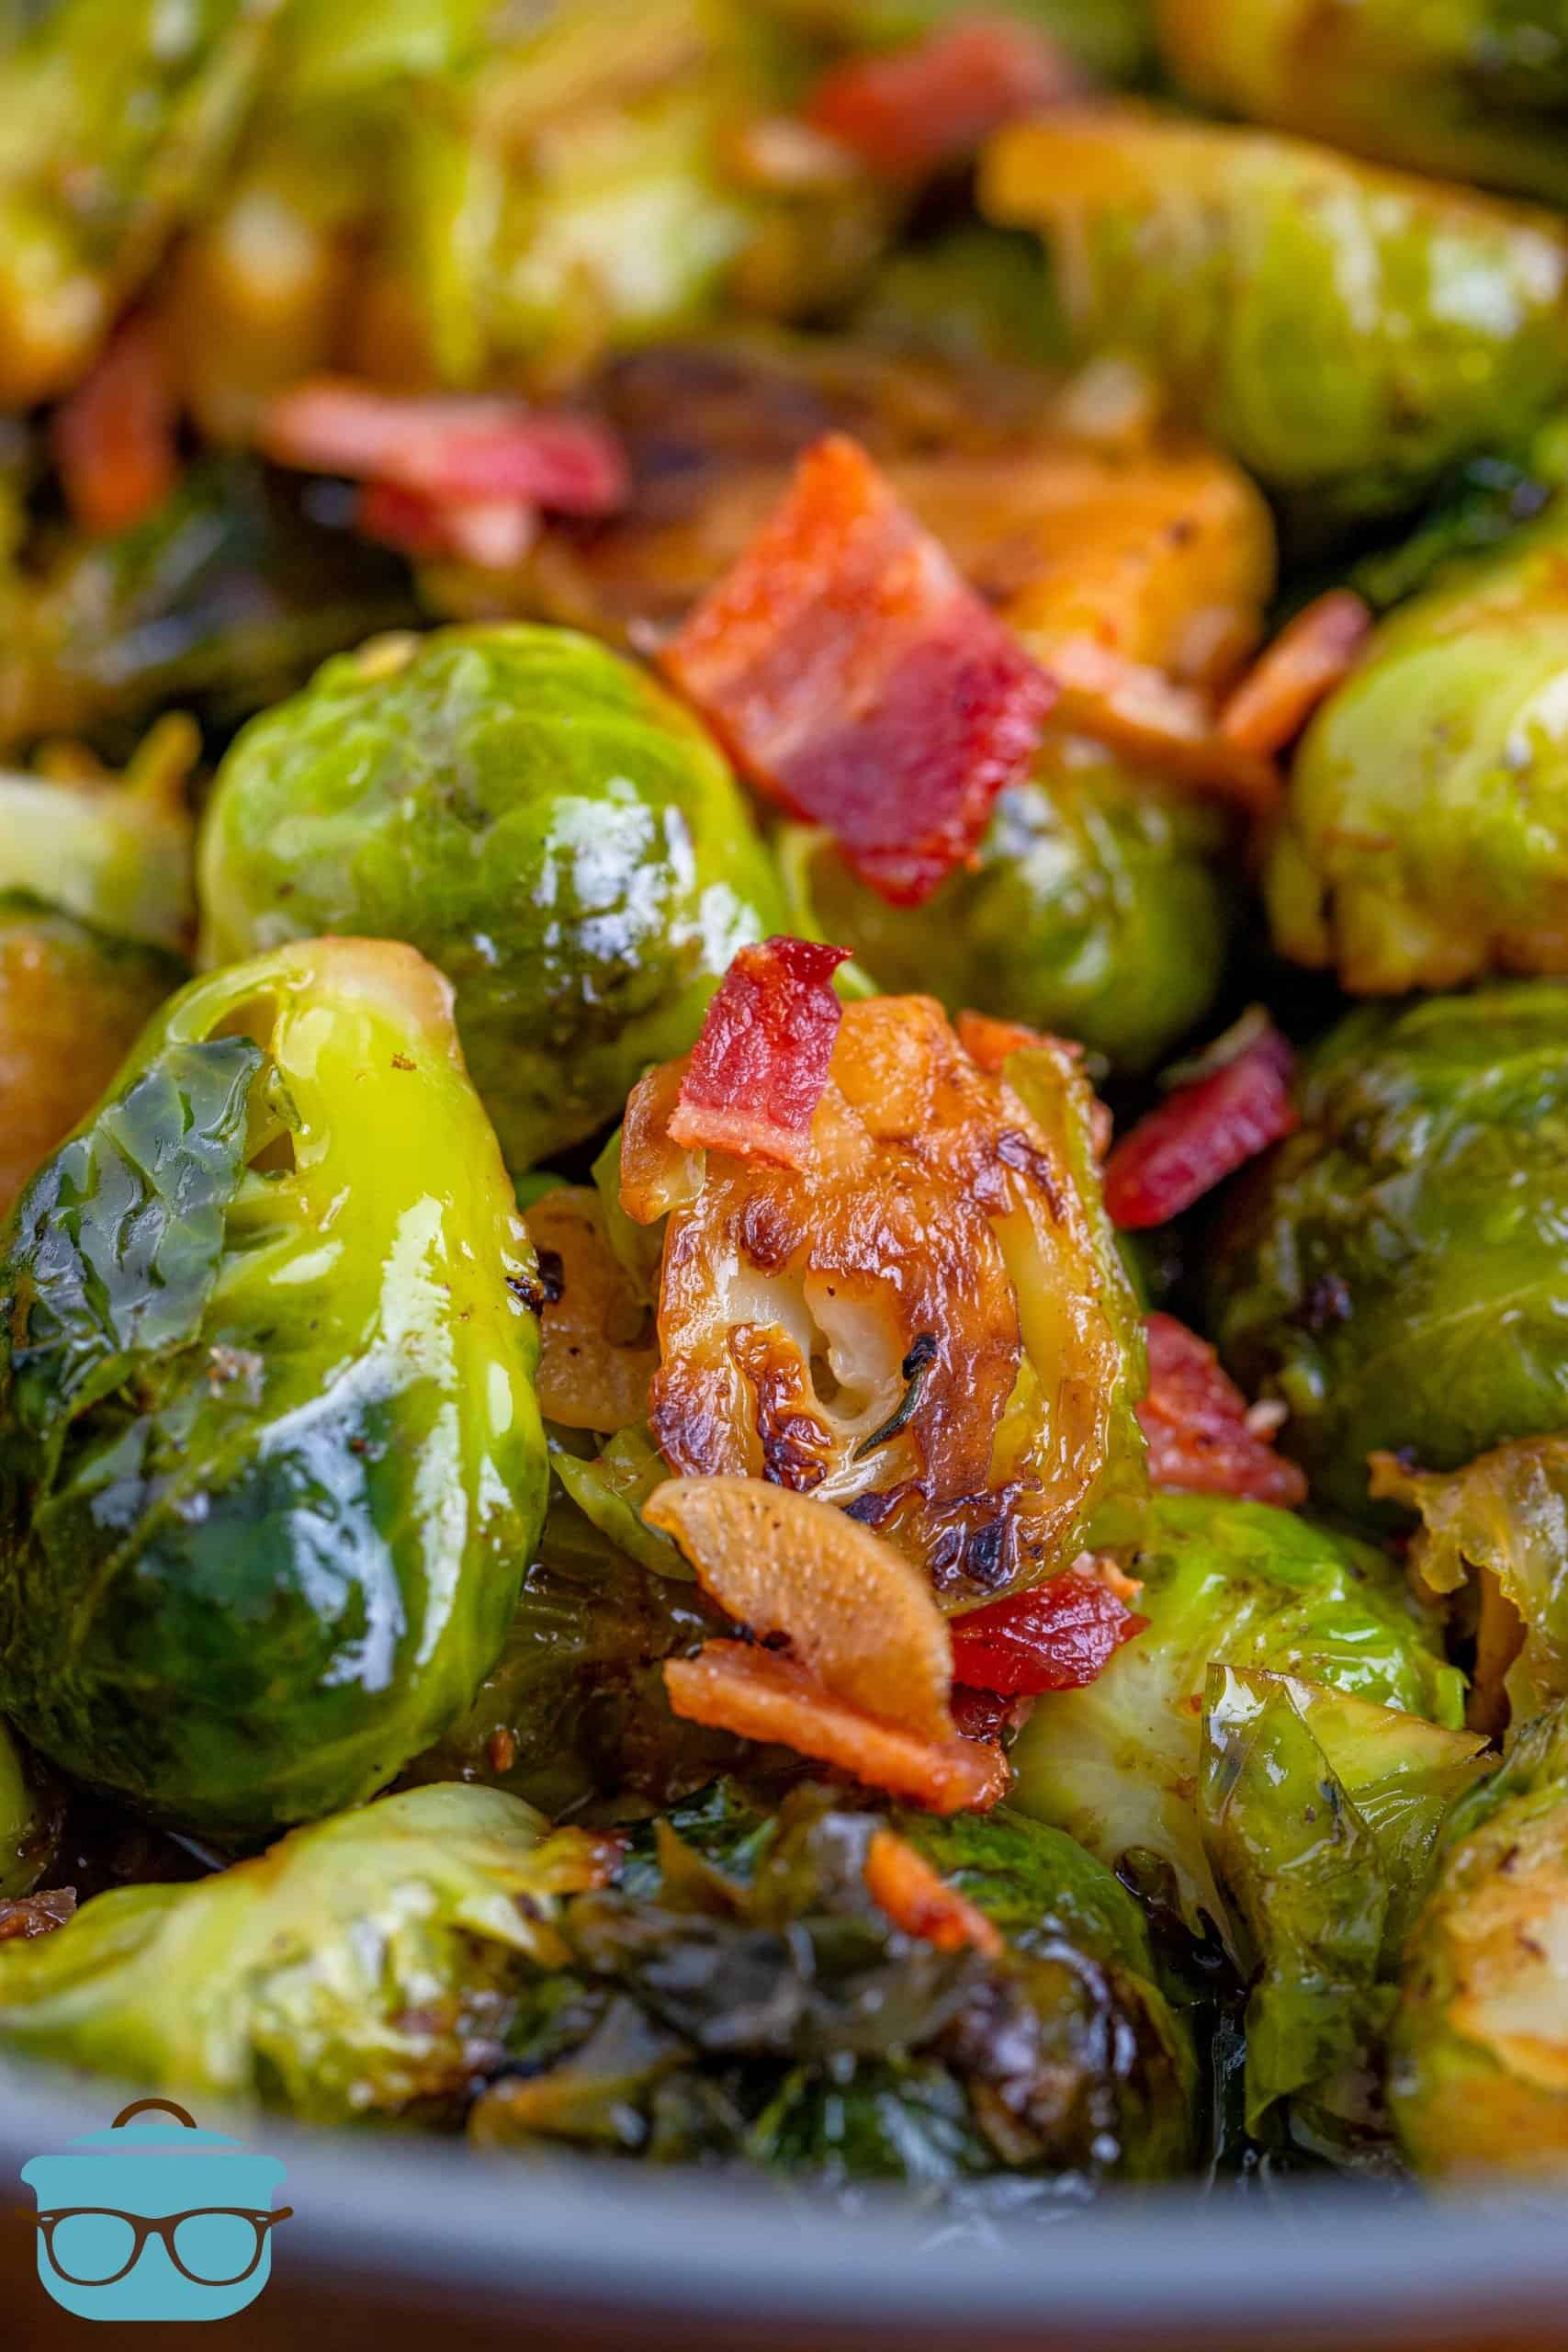 Stovetop Brussel Sprouts shown closeup, fully cooked and chopped bacon.